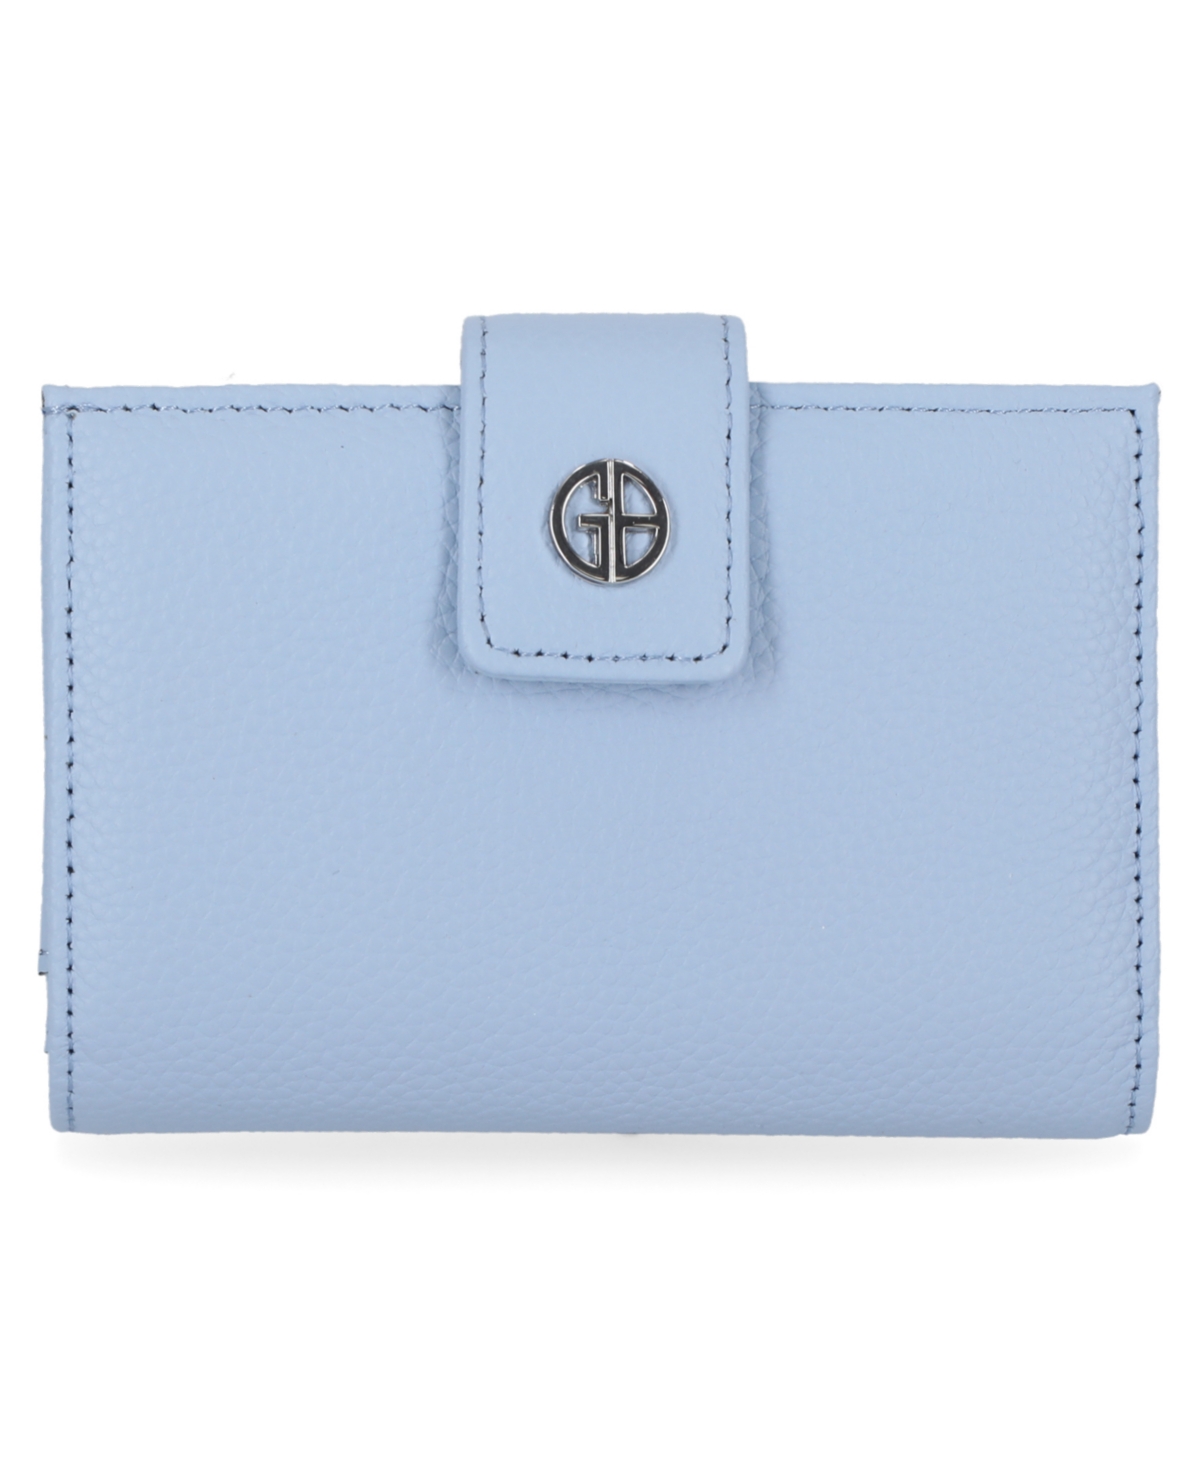 Framed Indexer Leather Wallet, Created for Macy's - Chambray